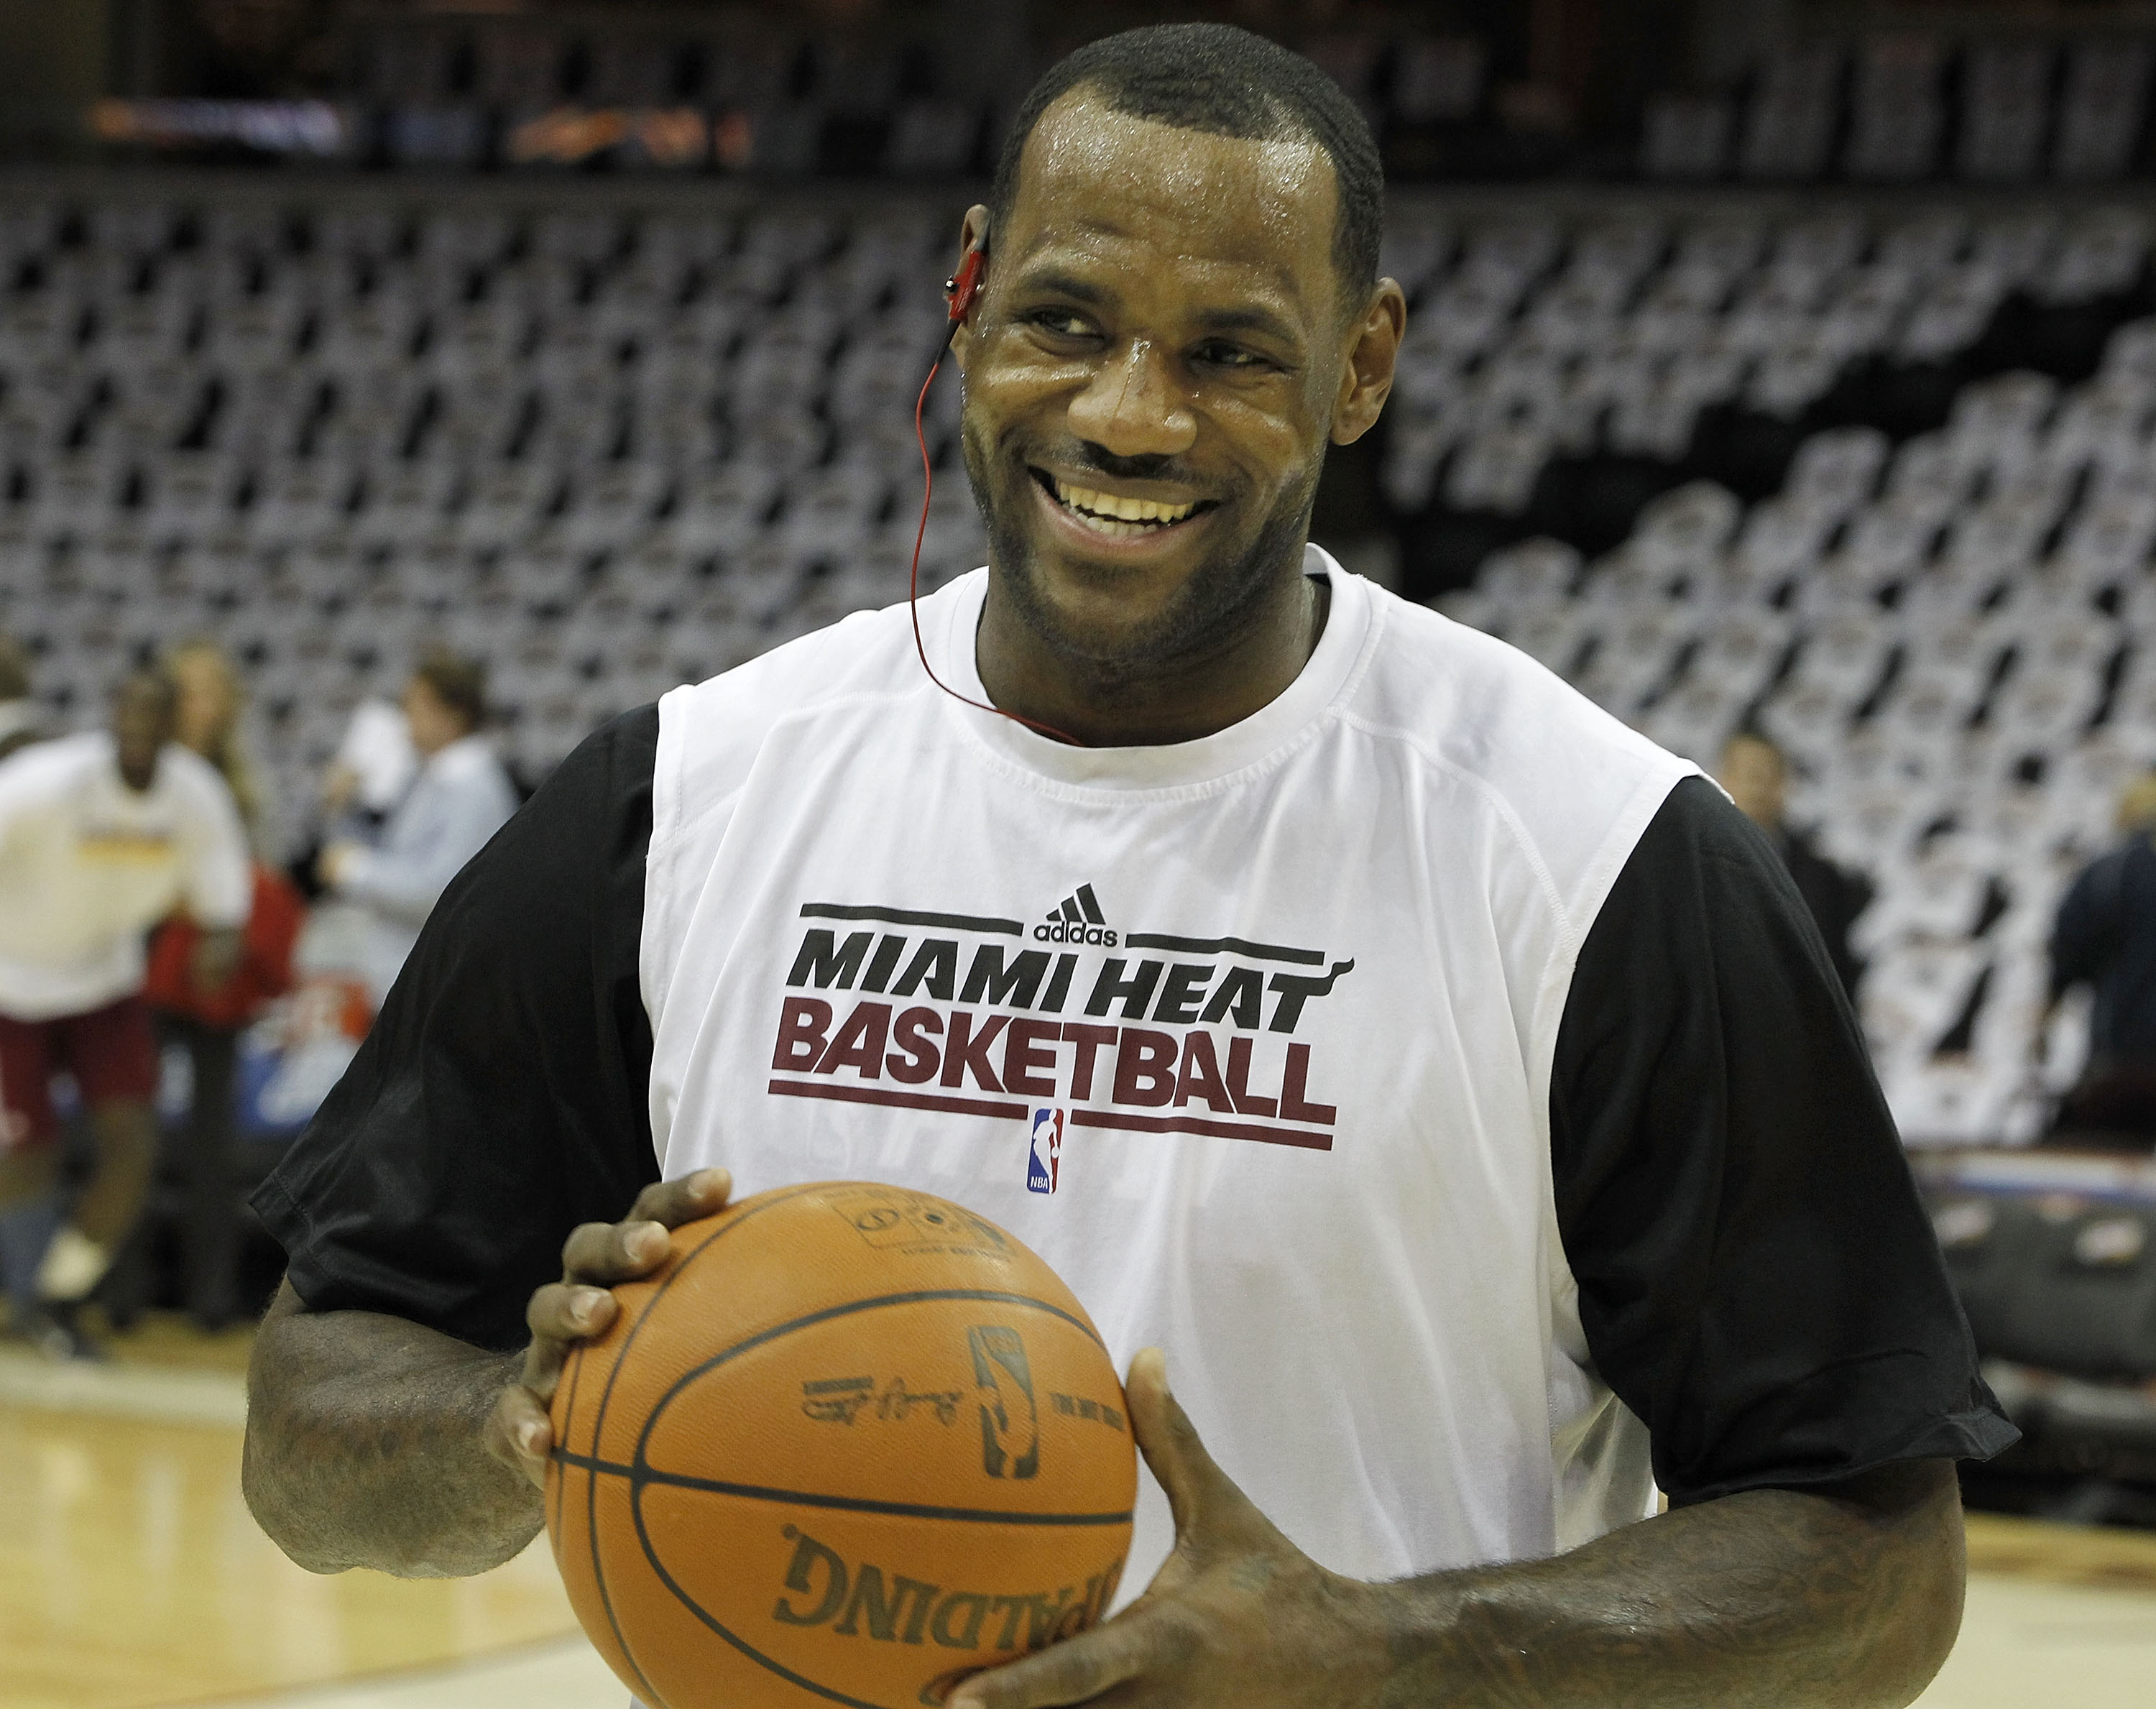 CLEVELAND, OH - DECEMBER 02:  LeBron James #6 of the Miami Heat smiles as he warms up prior to playing the Cleveland Cavaliers at Quicken Loans Arena on December 2, 2010 in Cleveland, Ohio.  NOTE TO USER: User expressly acknowledges and agrees that, by do